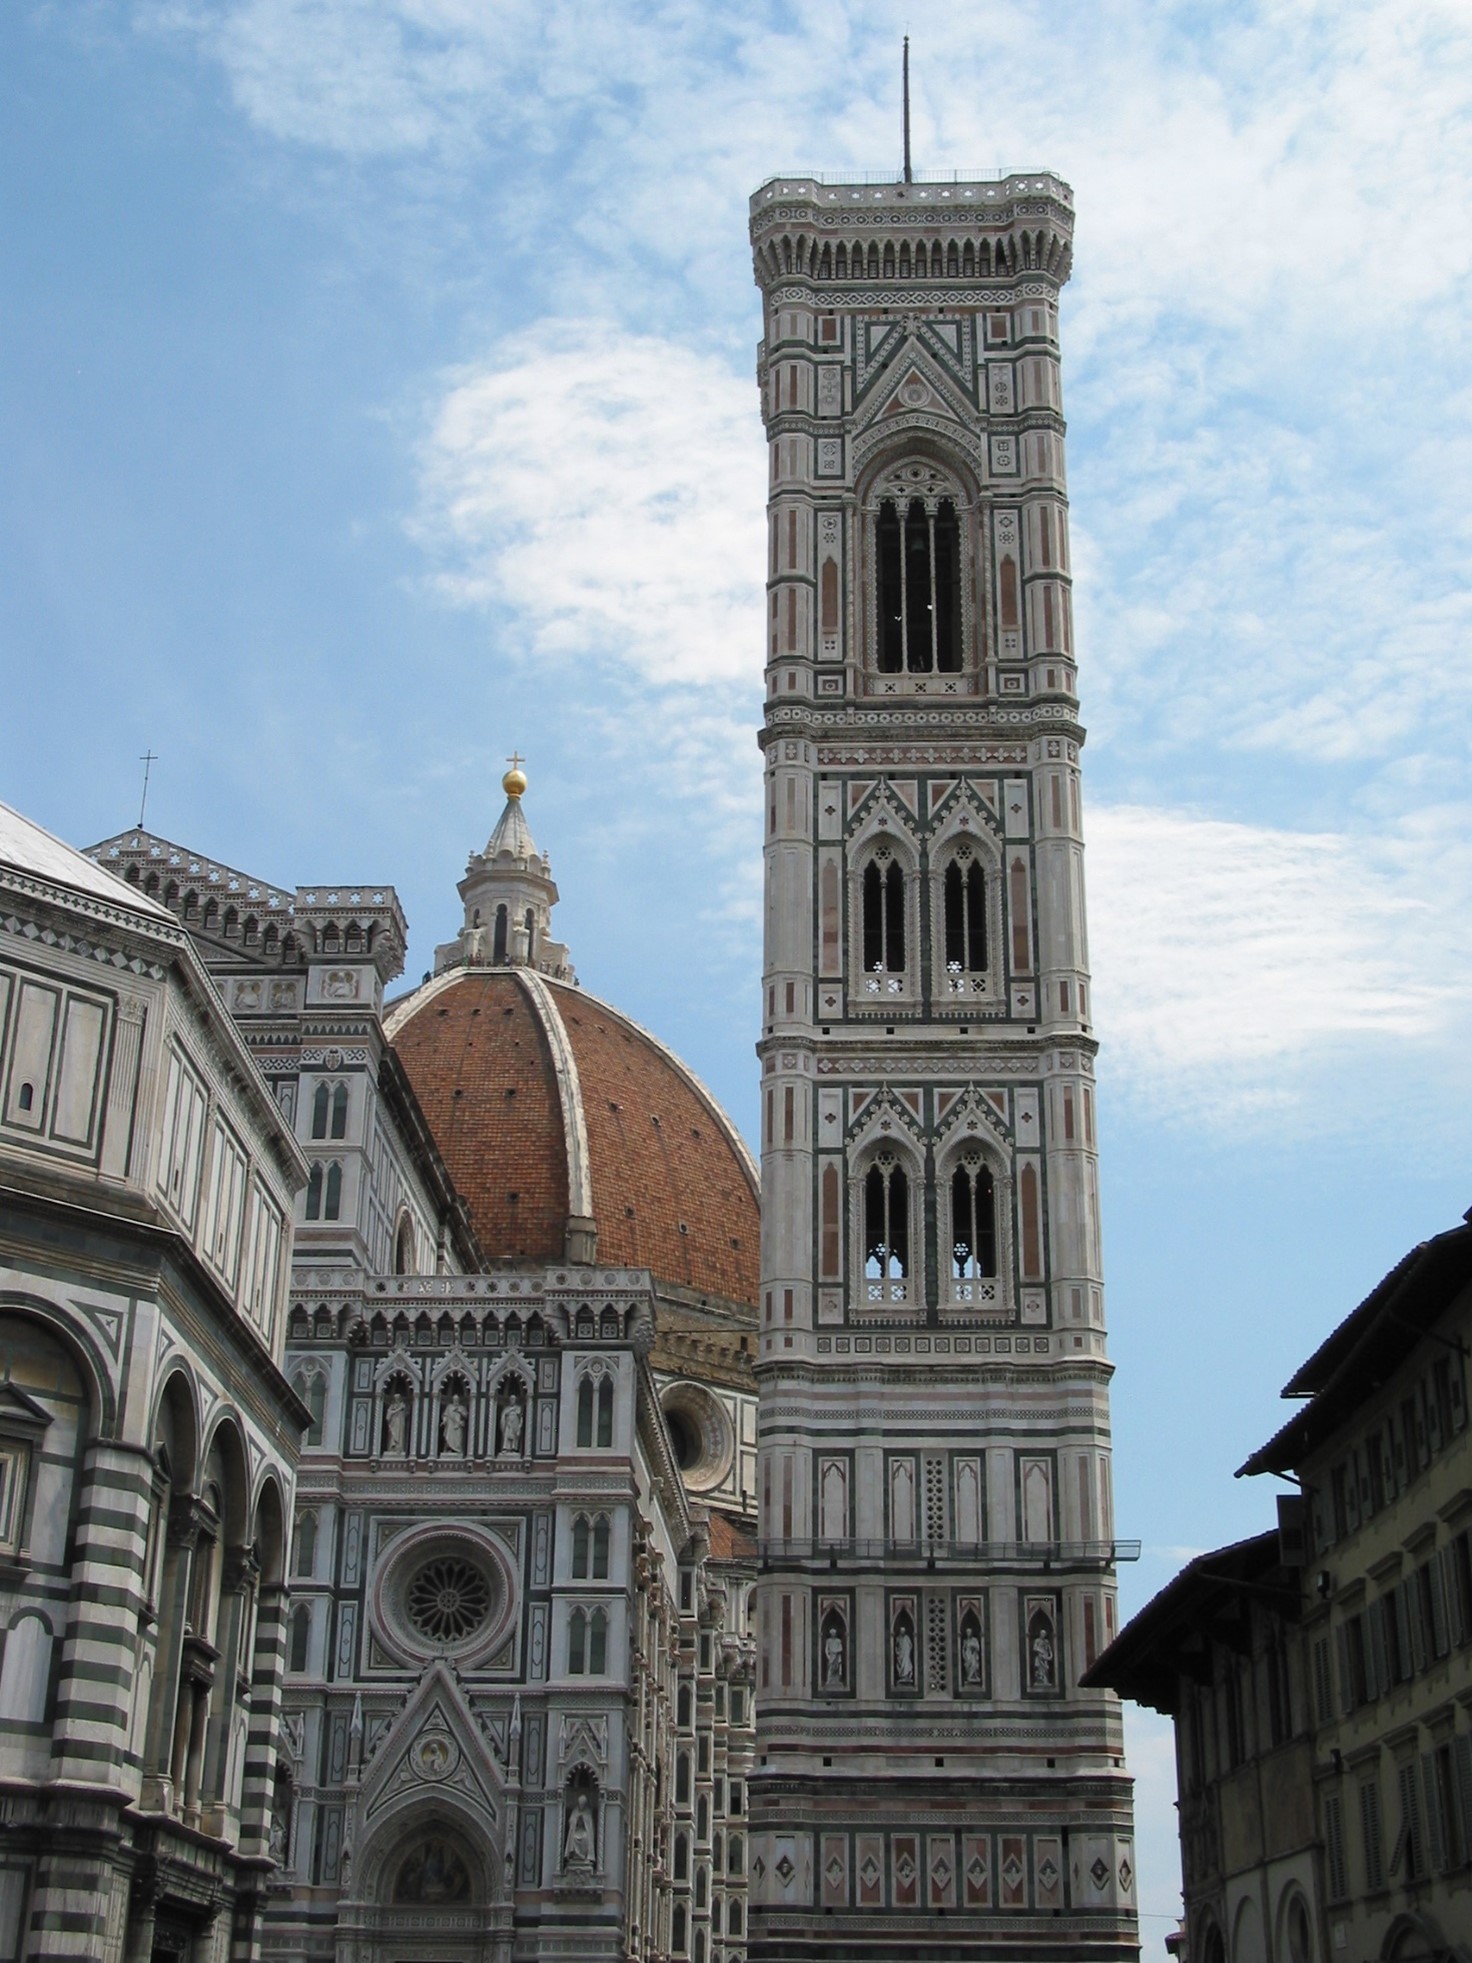 The Campanile di Giotto (Giotto’s Belltower) on the right side of the Cathedral.